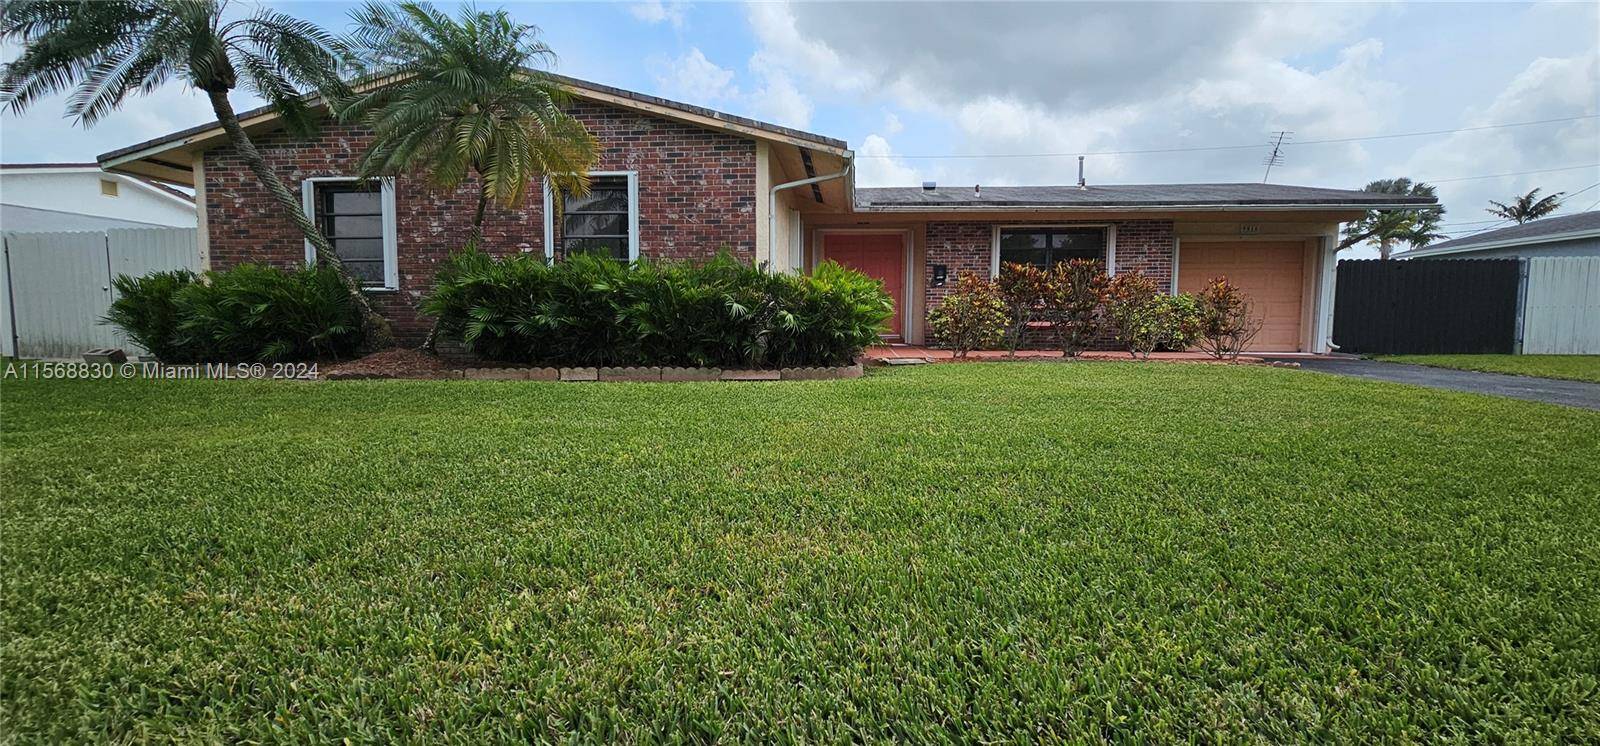 Nstled in the quiet neighborhood of Cutler Bay, FL, this charming property features three cozy bedrooms and two bathrooms, ideal for creative renovations.